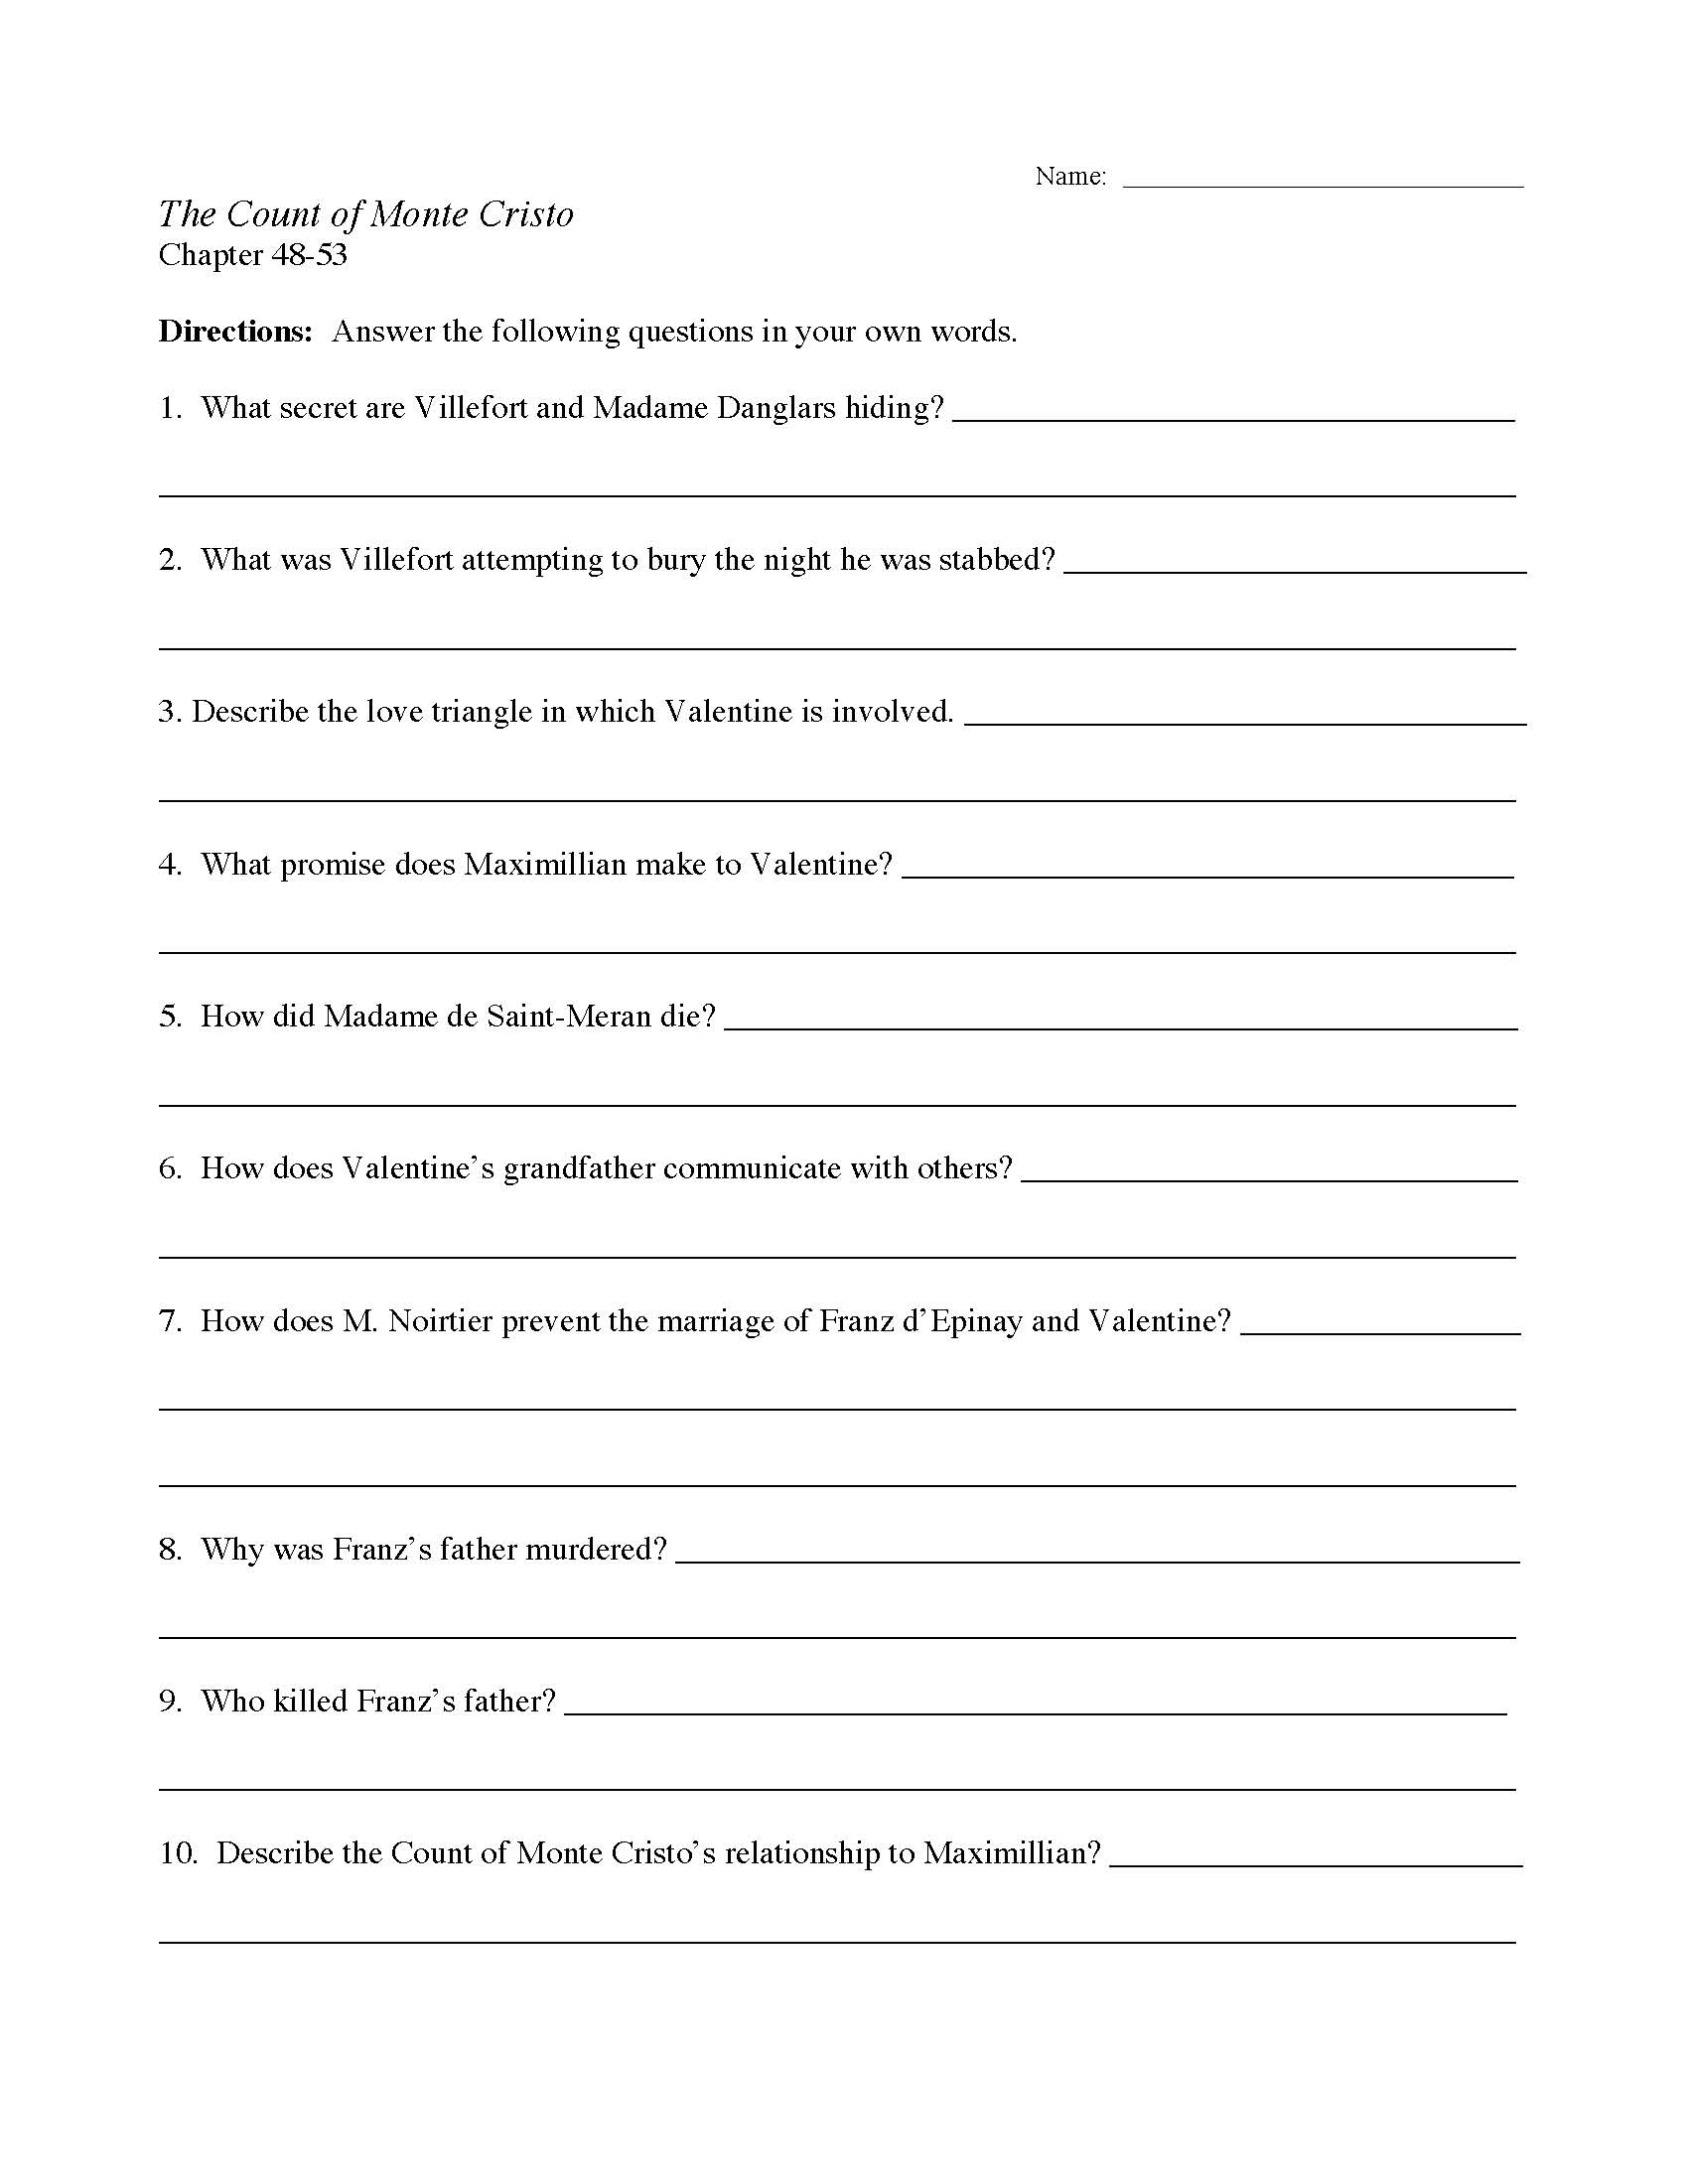 This is a preview image of the The Count of Monte Cristo Chapters 48-53 Worksheet.